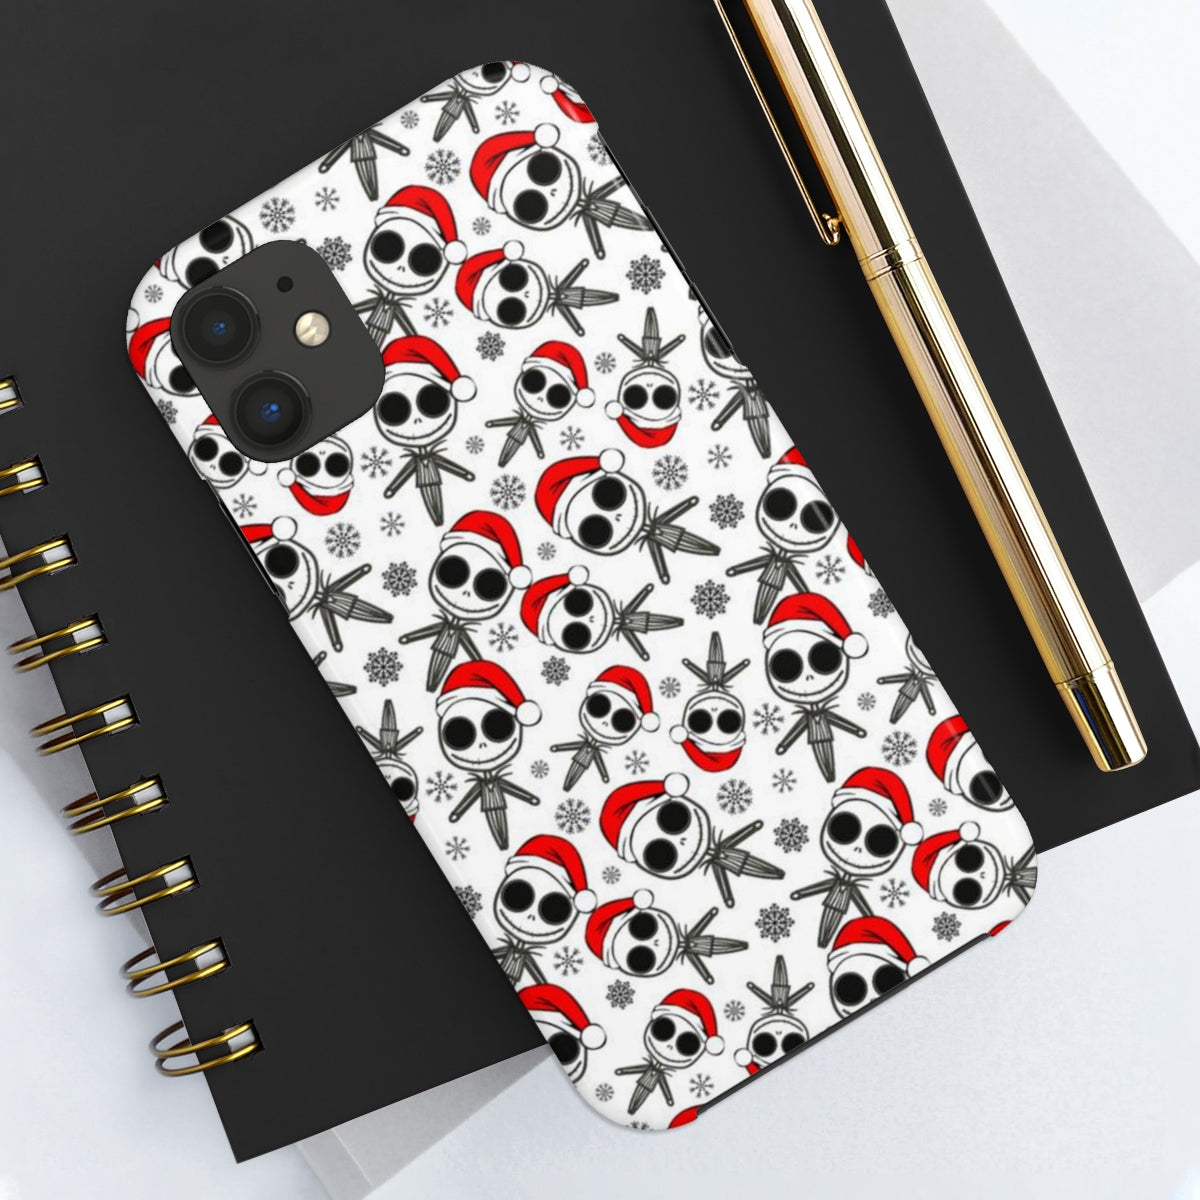 Tough Phone Case - Skelly Claus